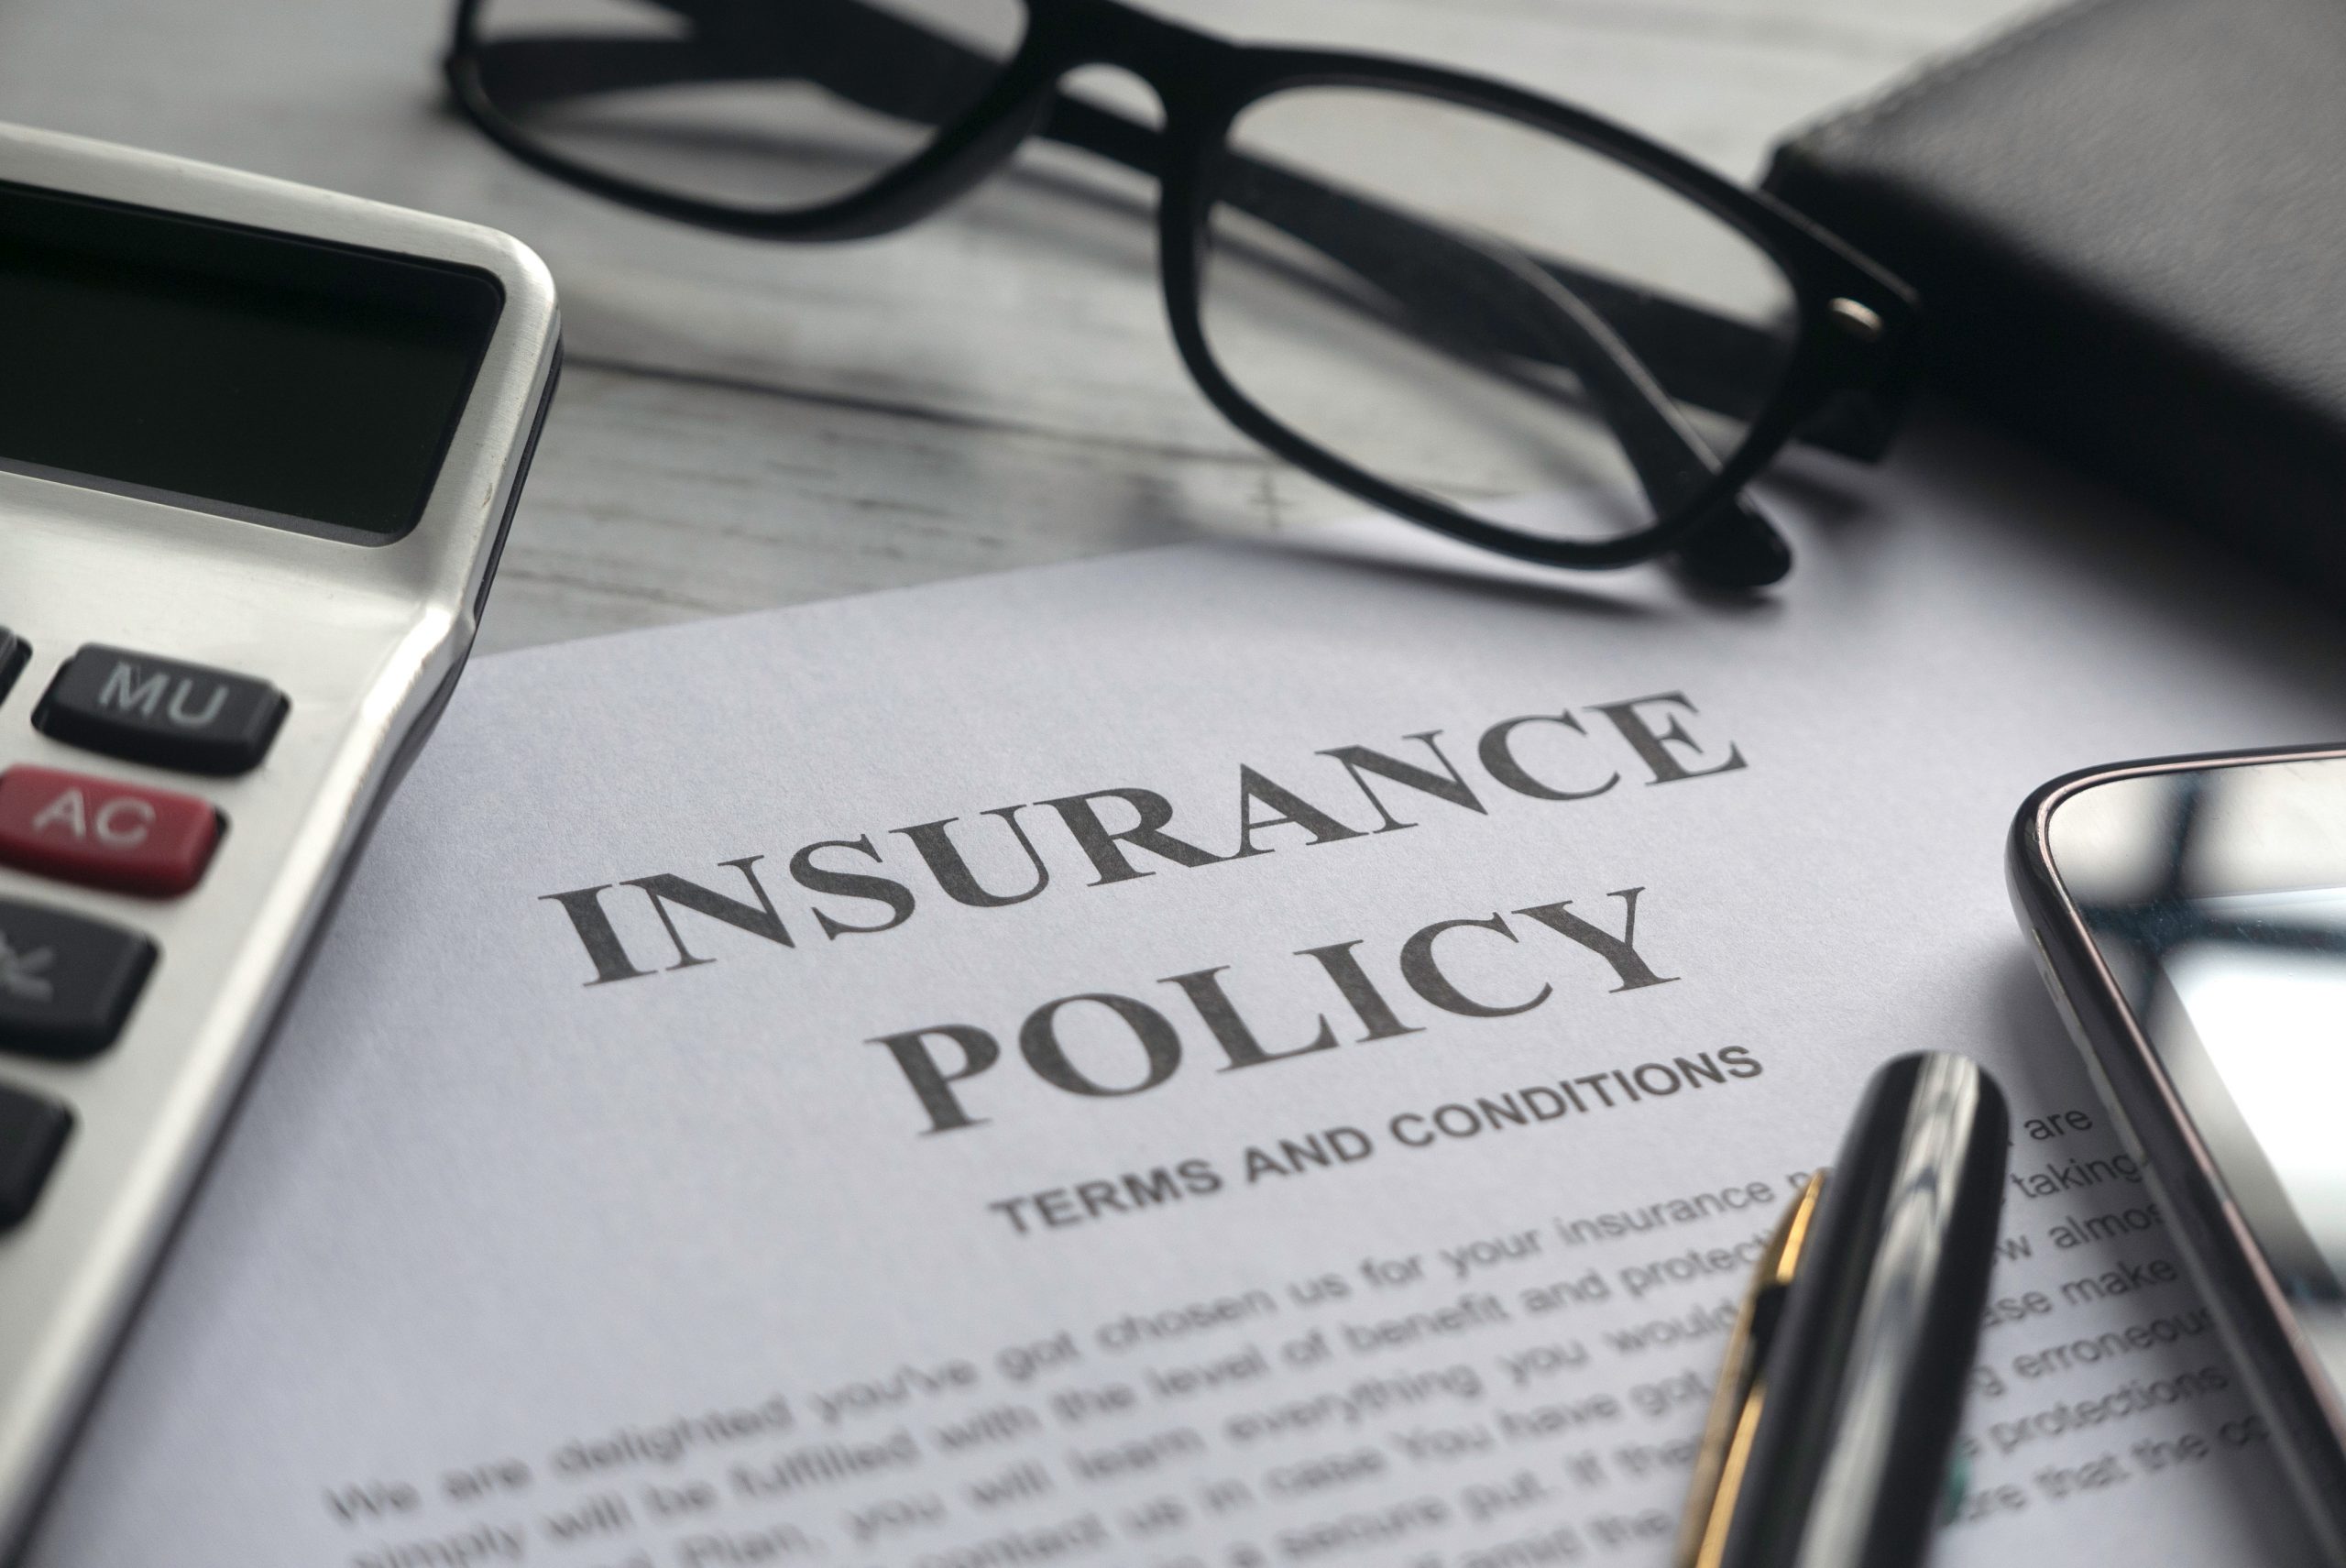  A document with details about insurance policy, along with a calculator, glasses, pen, and mobile phone on a wooden table.